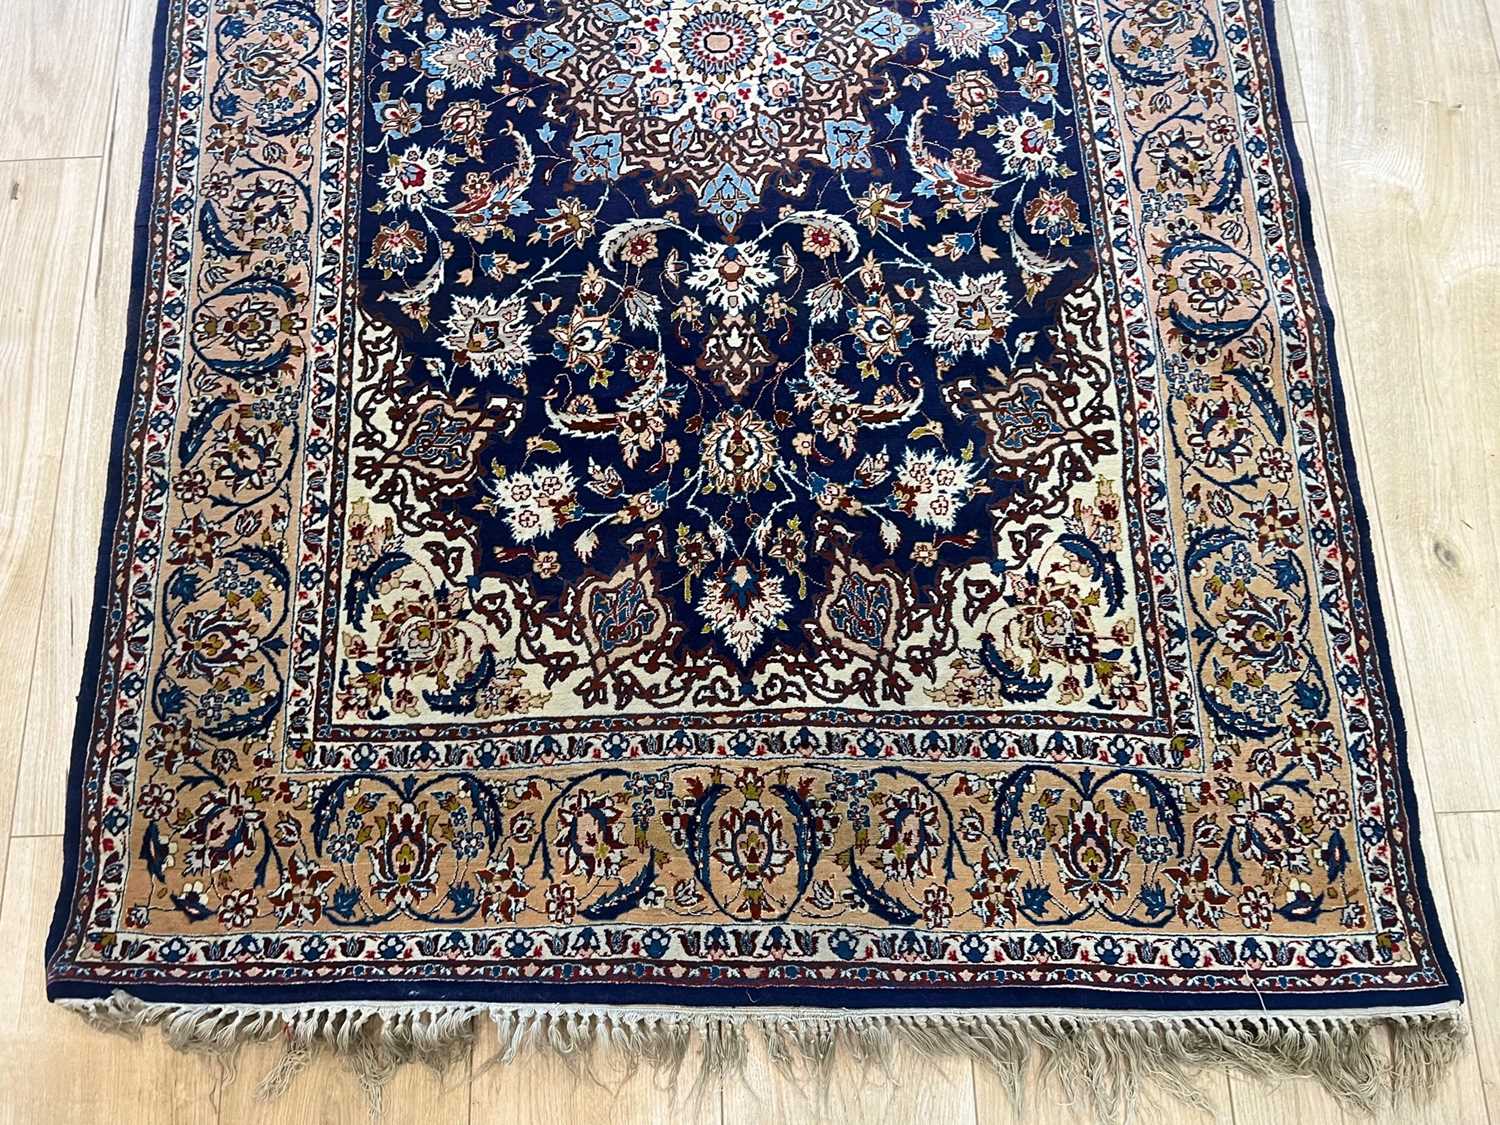 A FINE PART SILK ISFAHAN CARPET, NORTH WEST PERSIA - Image 4 of 9